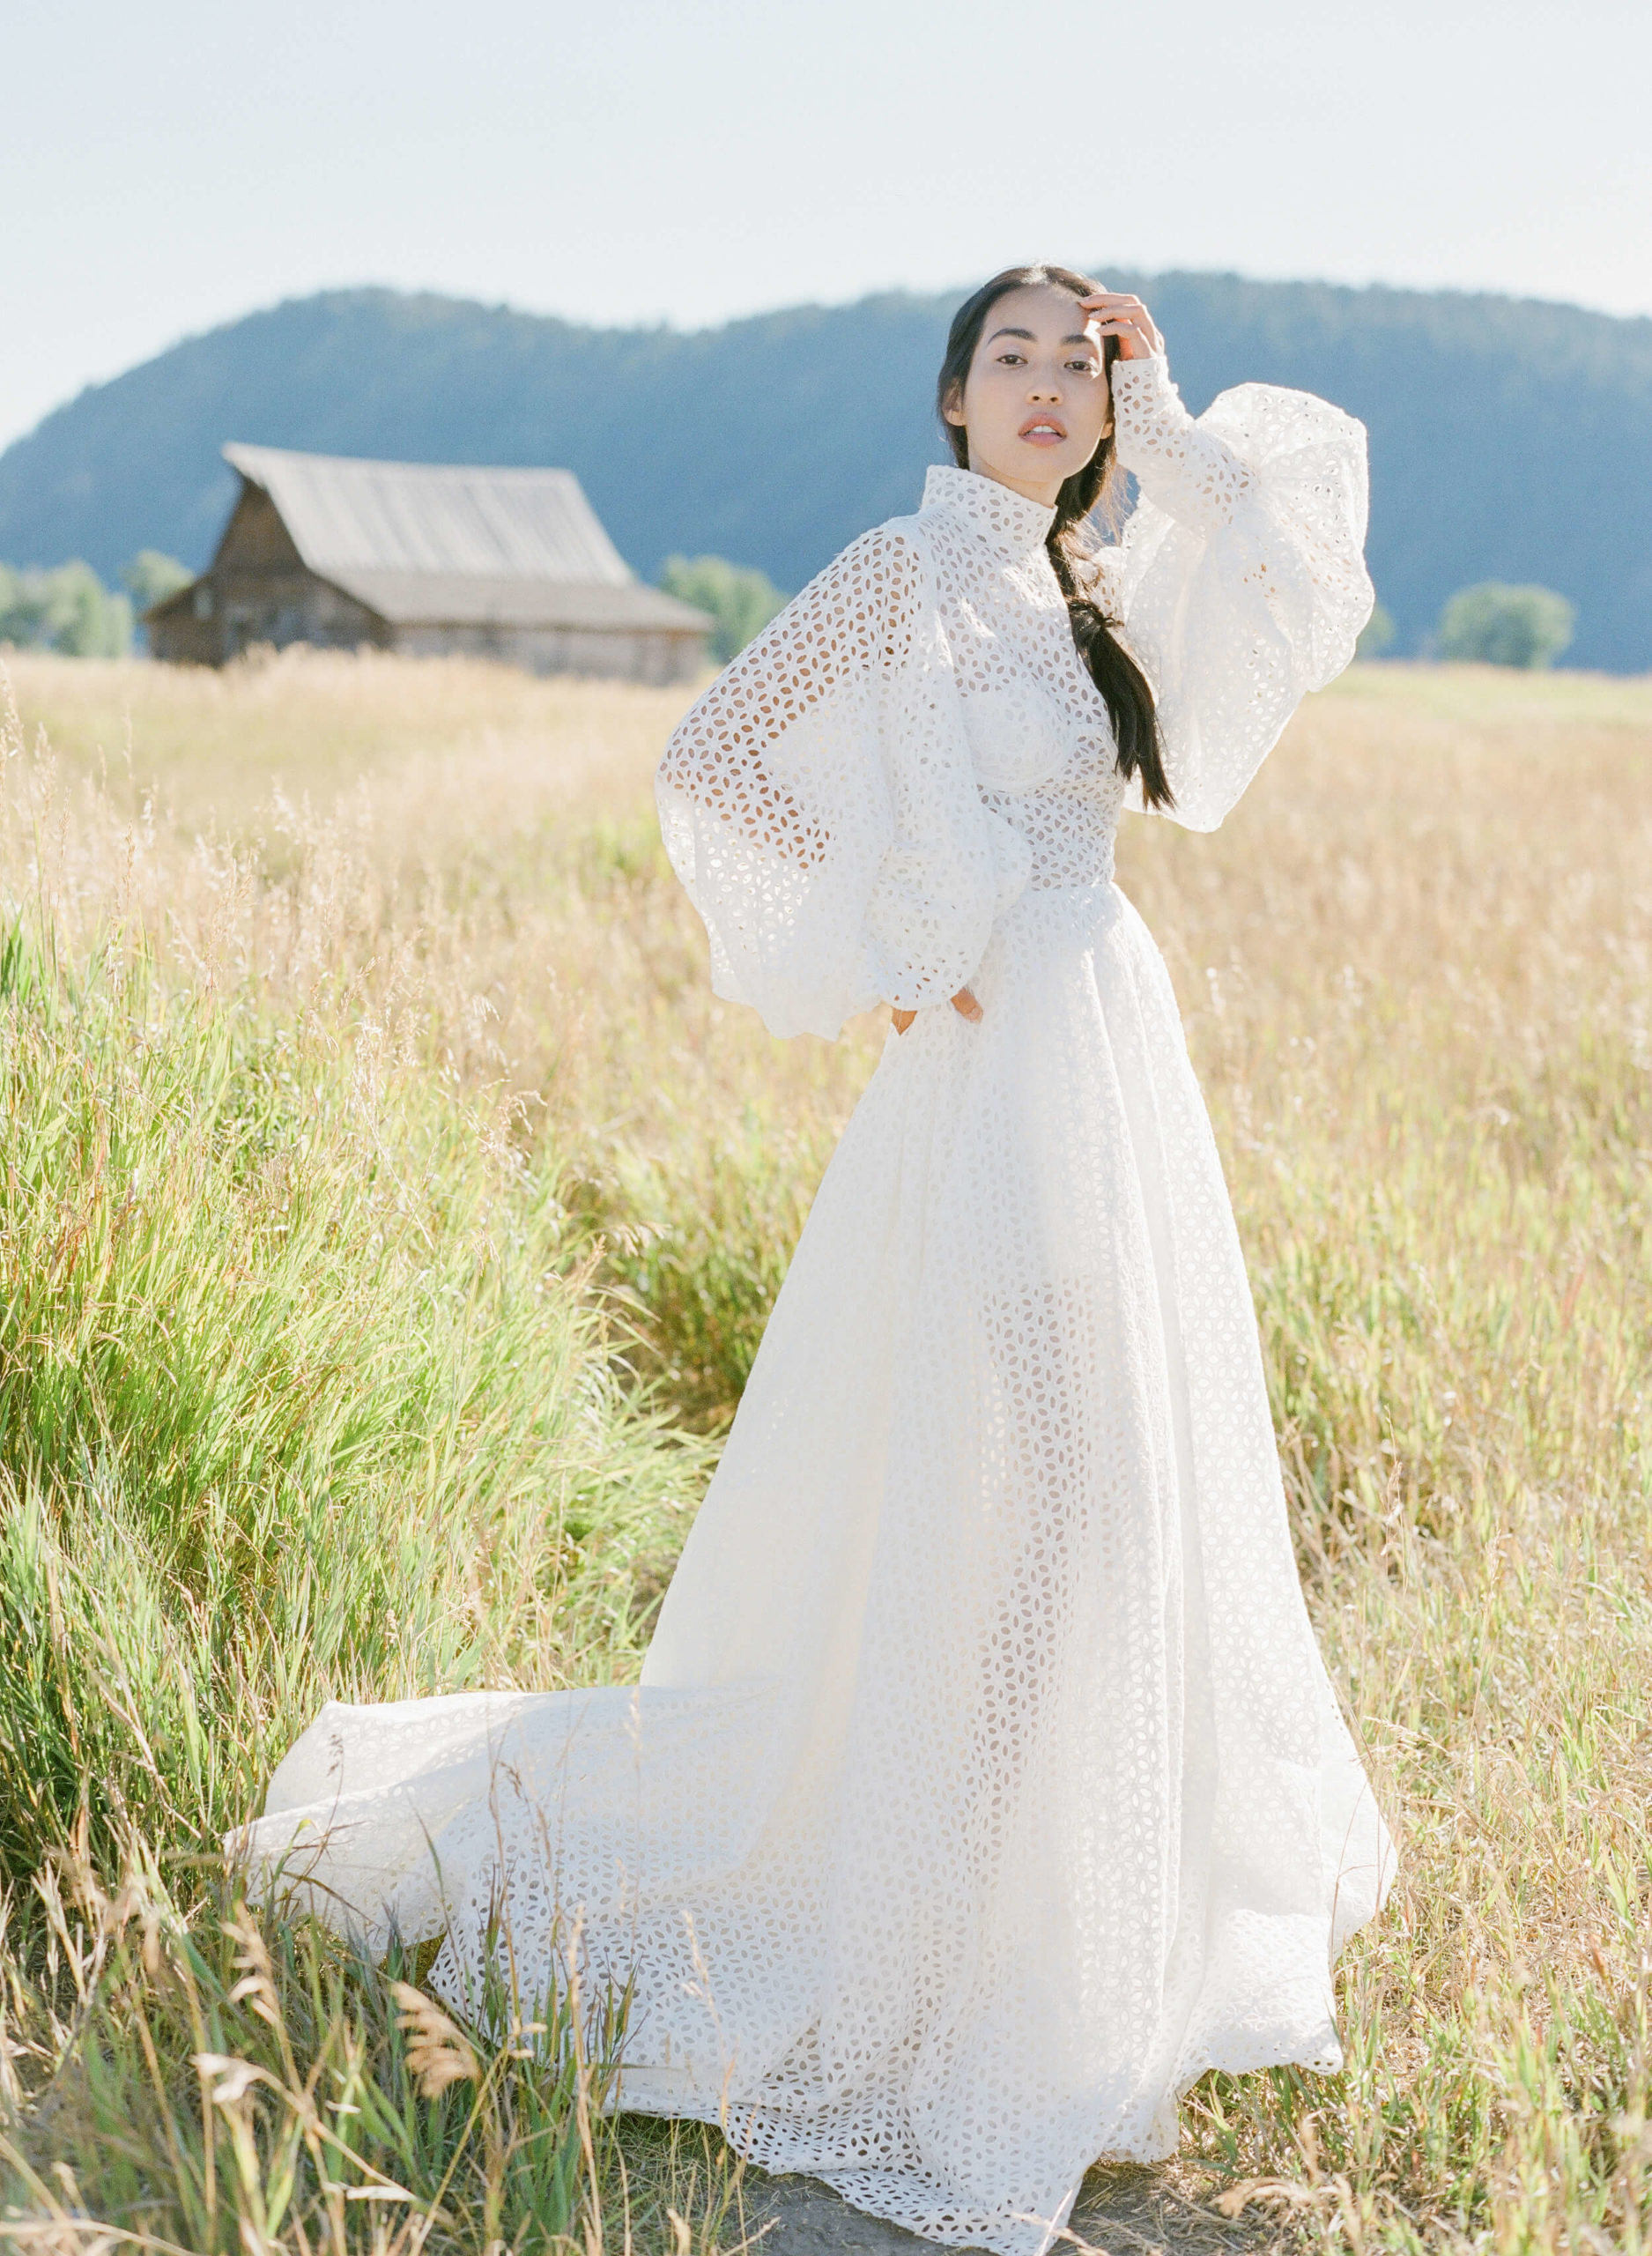  Americana-Inspired Bridal gown with white eyelet